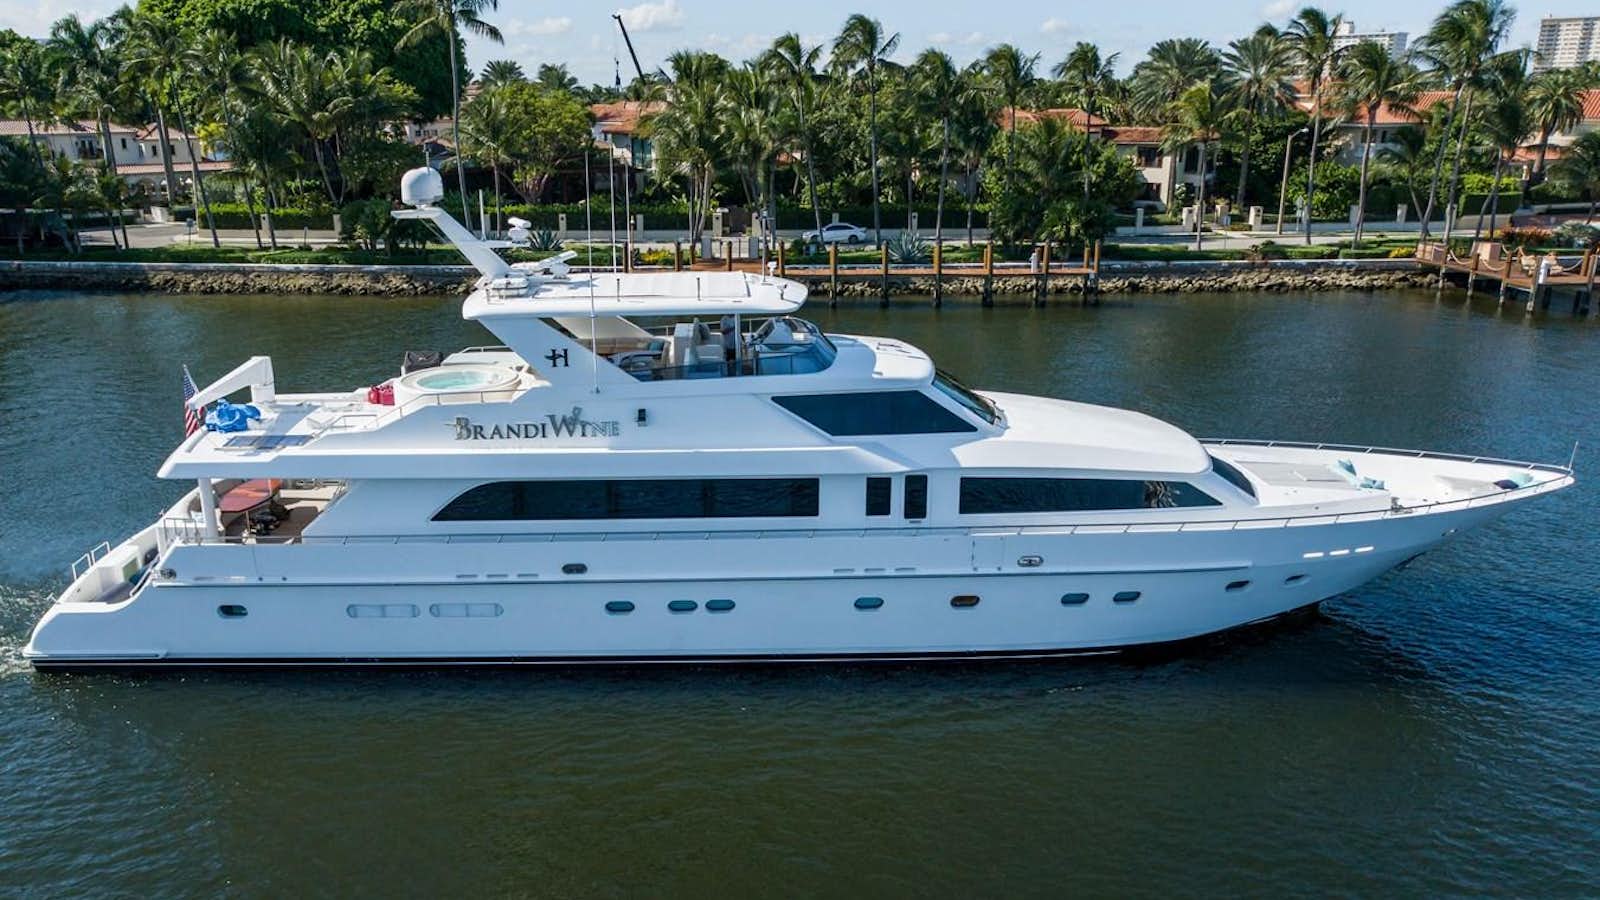 Watch Video for BRANDI WINE Yacht for Sale